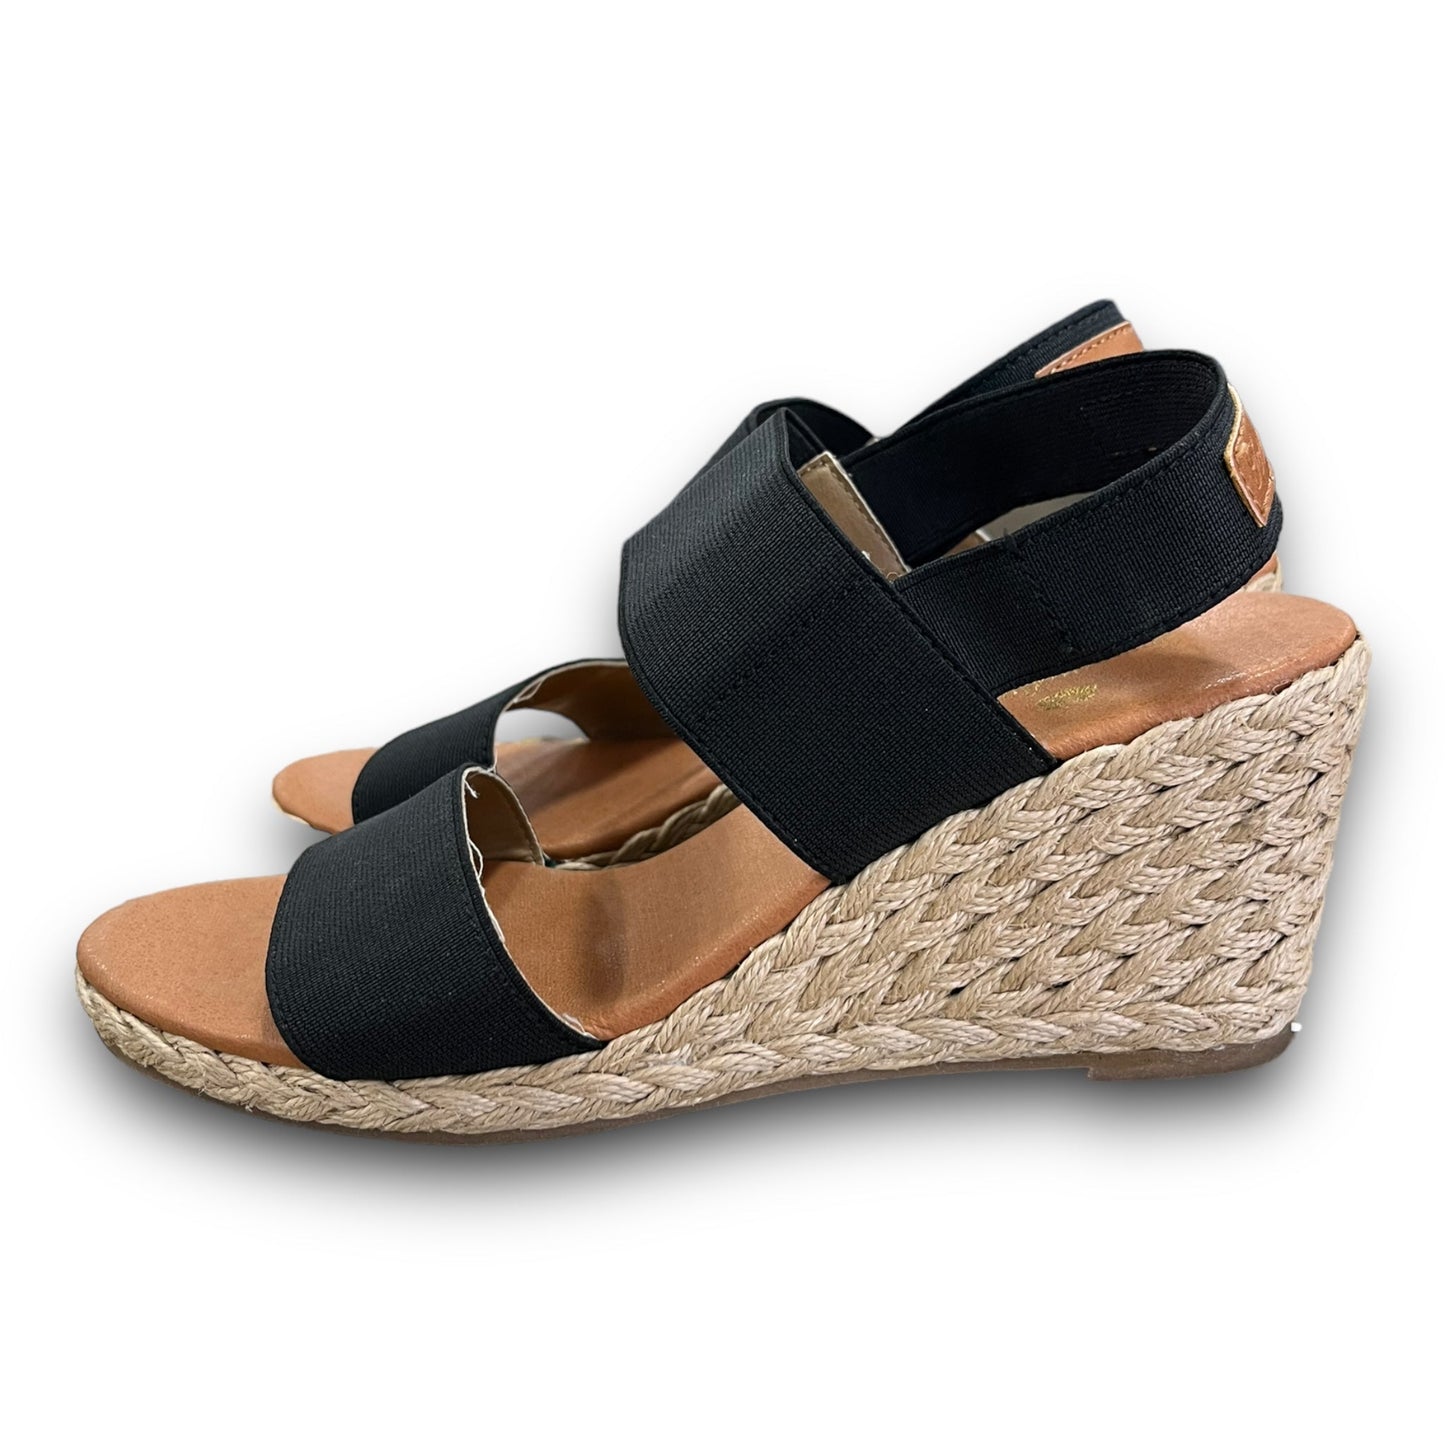 Sandals Heels Wedge By Tommy Bahama  Size: 5.5